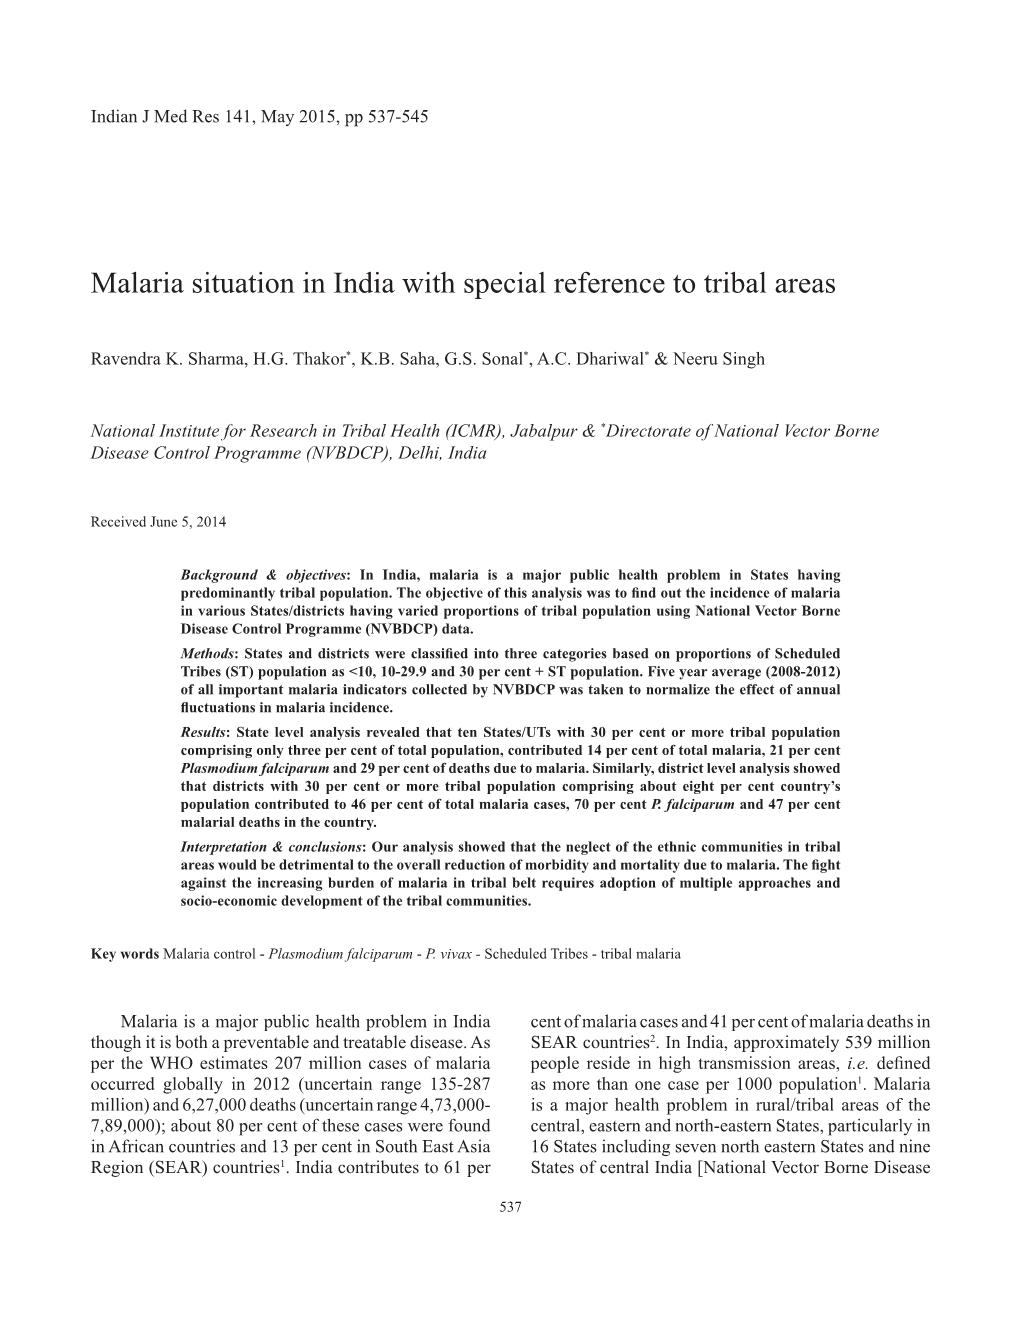 Malaria Situation in India with Special Reference to Tribal Areas